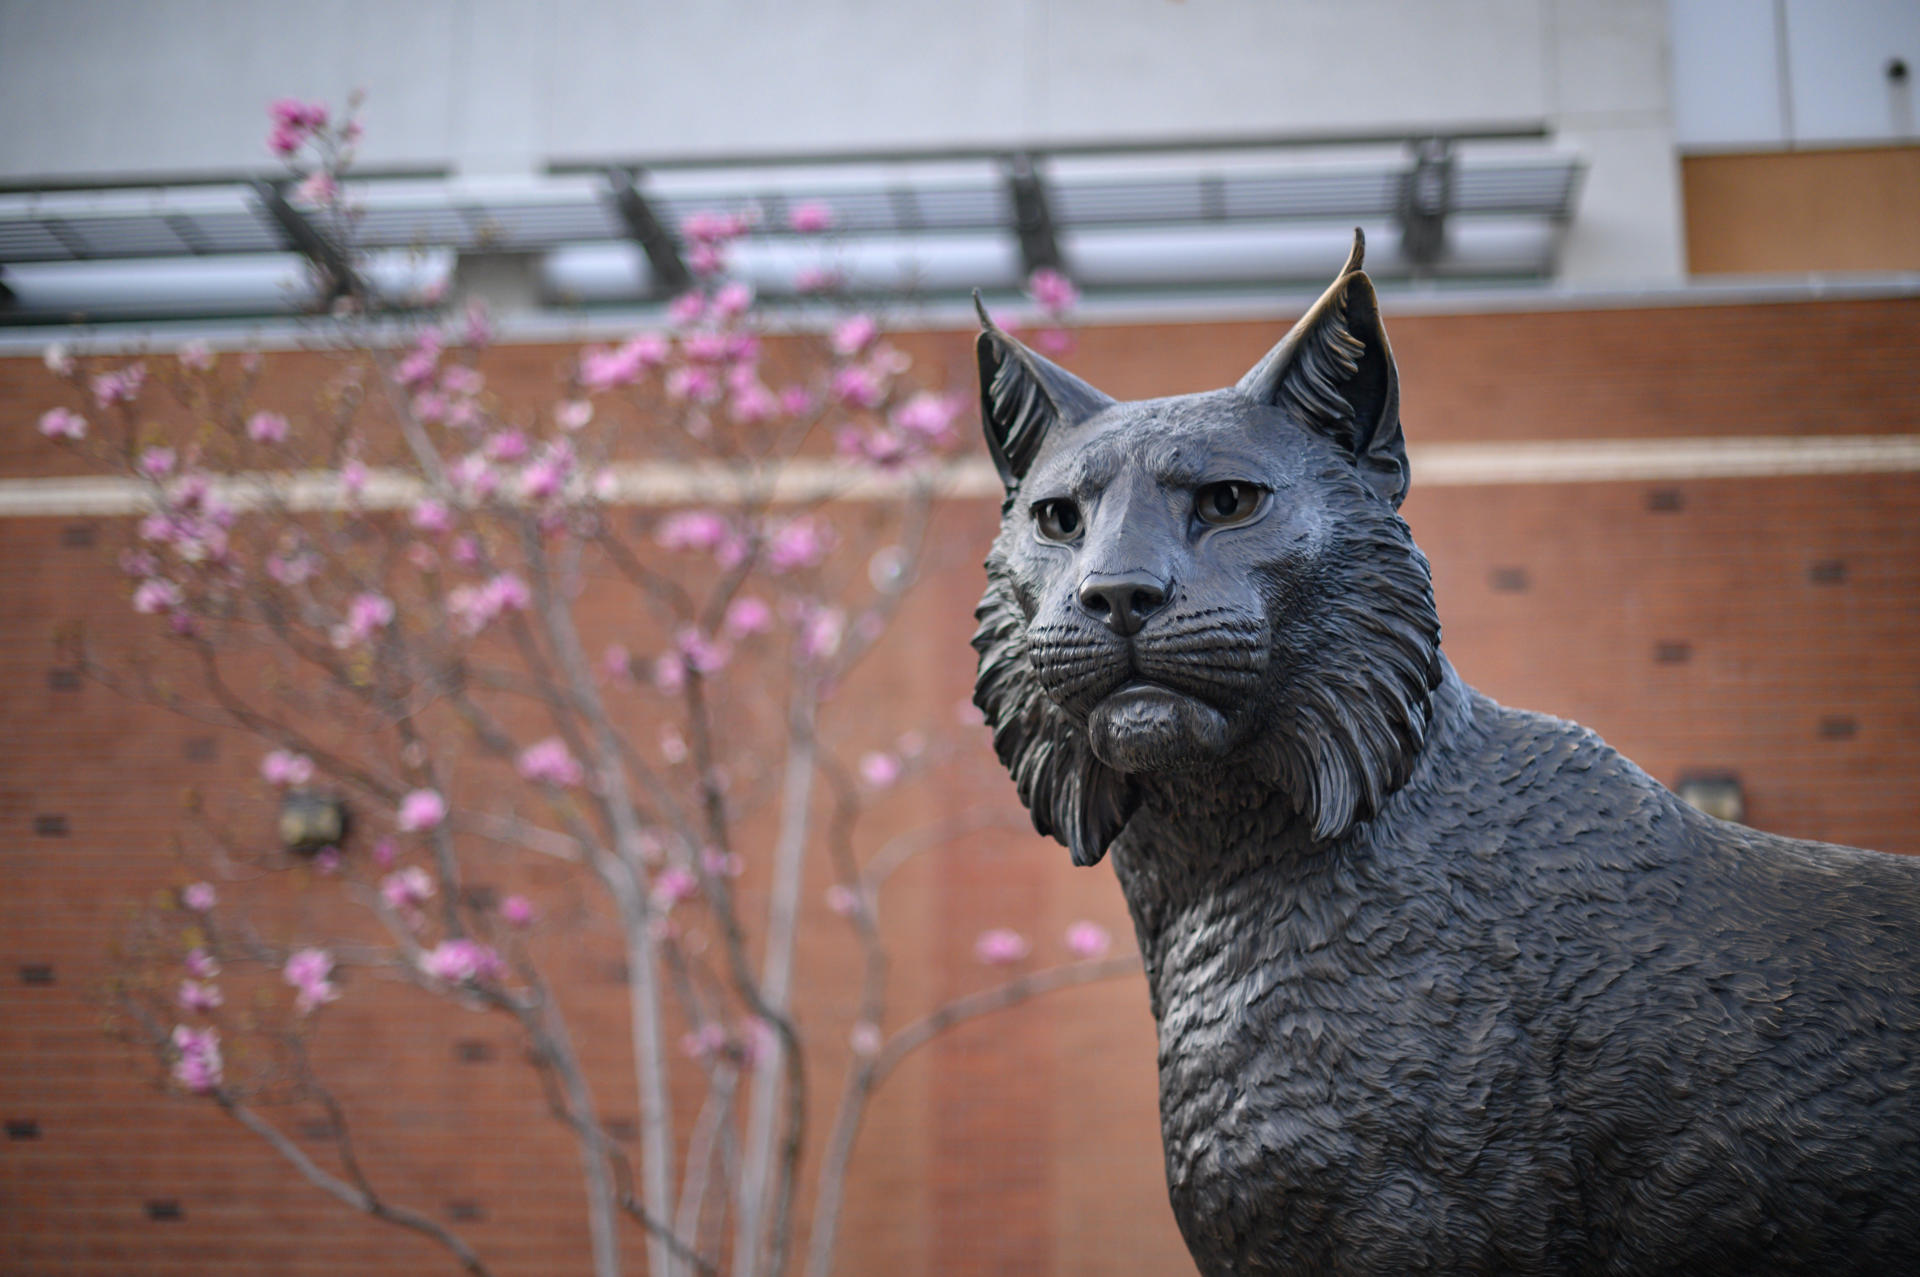 The Wildcat Statue stands in the foreground with blooming trees in the background.